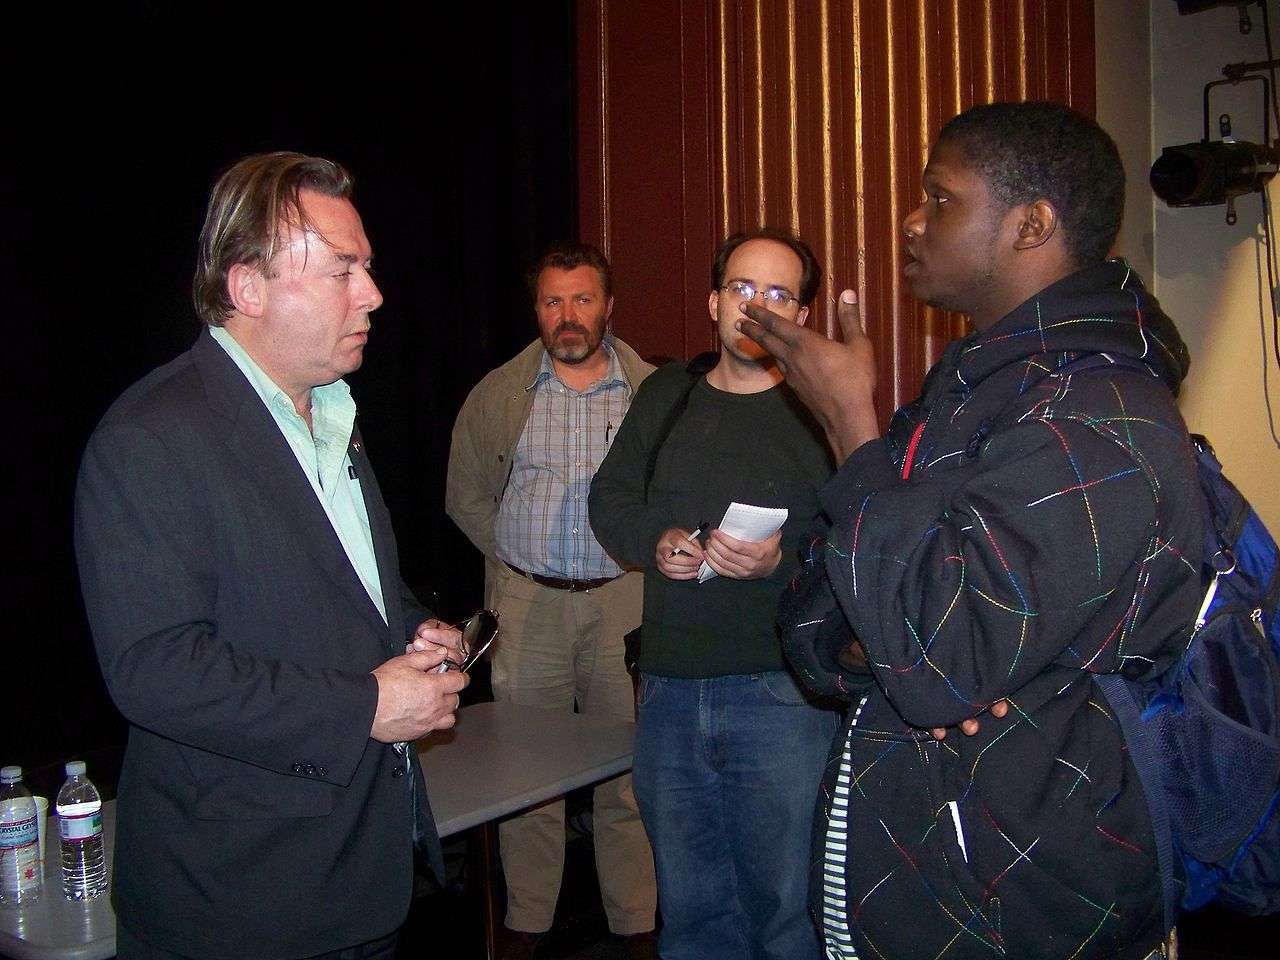 Hitchens after a talk at The College of New Jersey in March 2009